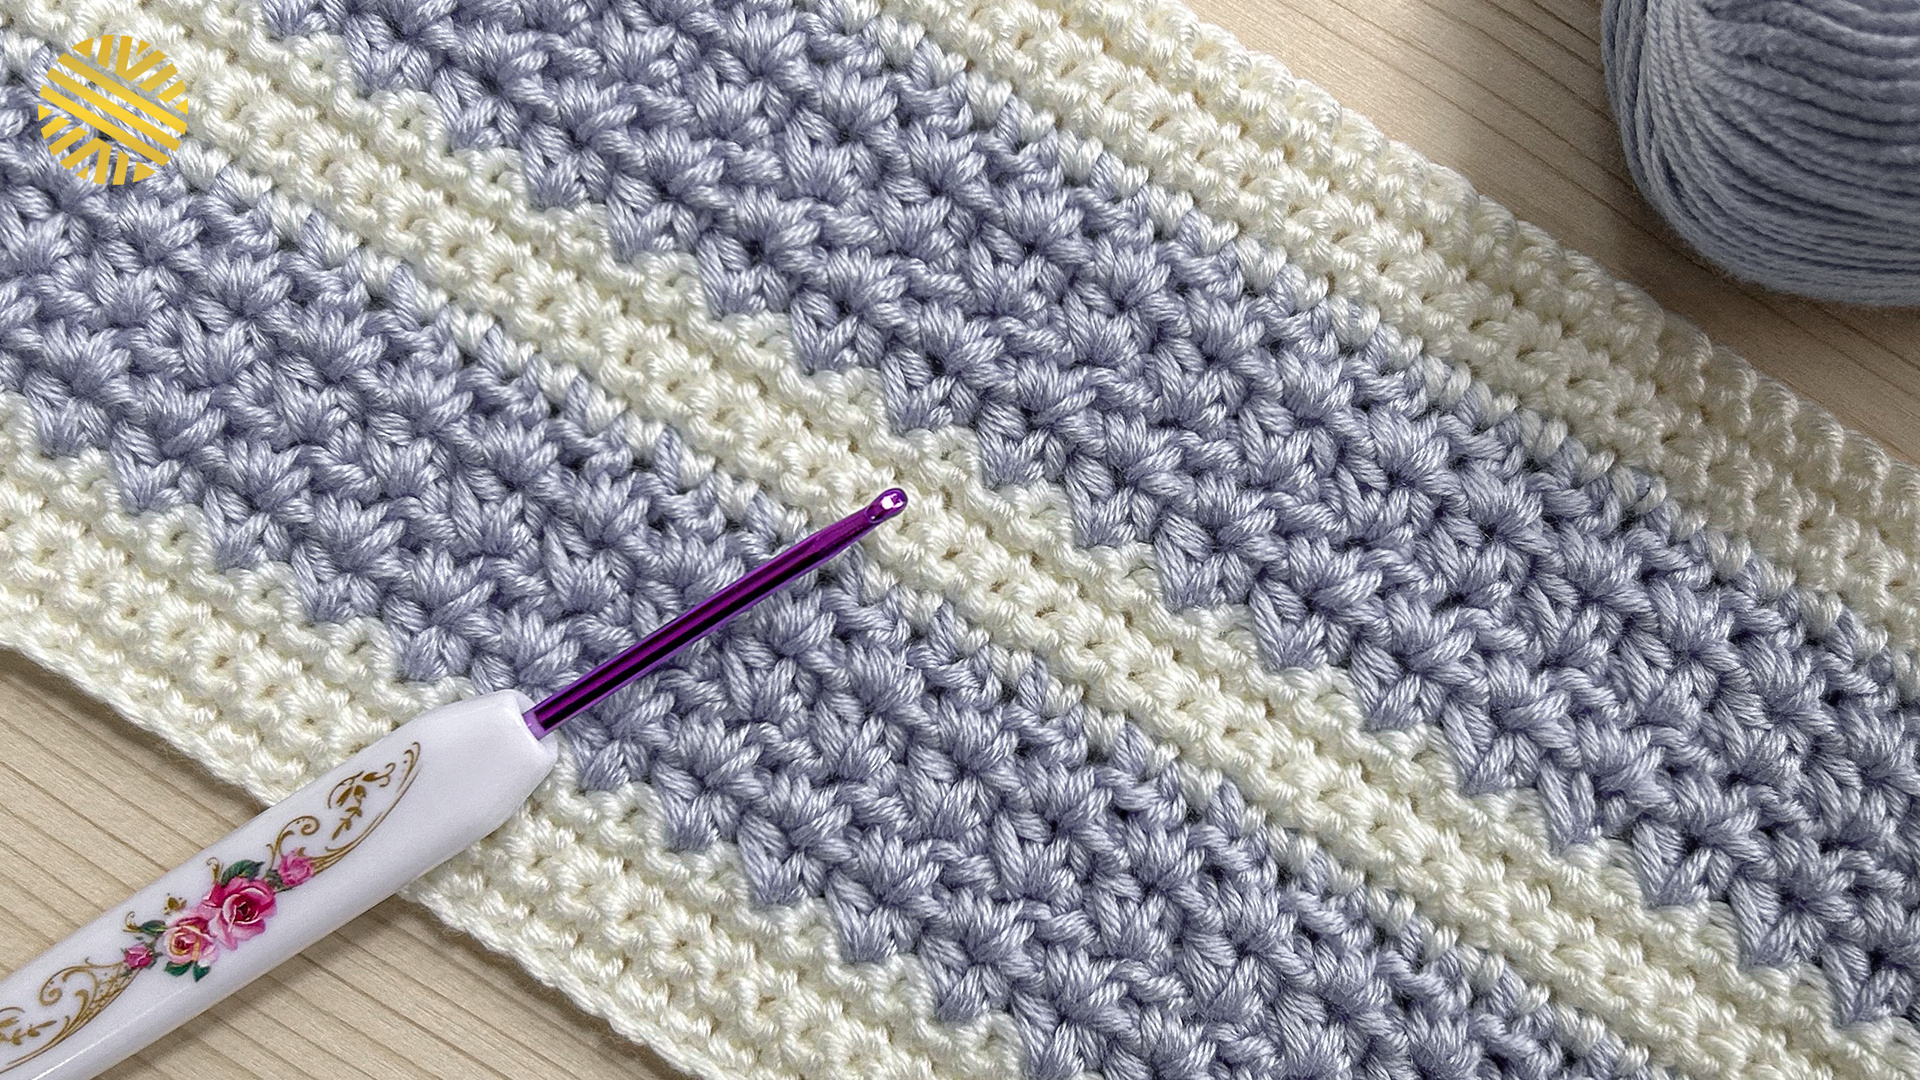 How To Hold A Crochet Hook And Yarn, Absolute Beginner Crochet